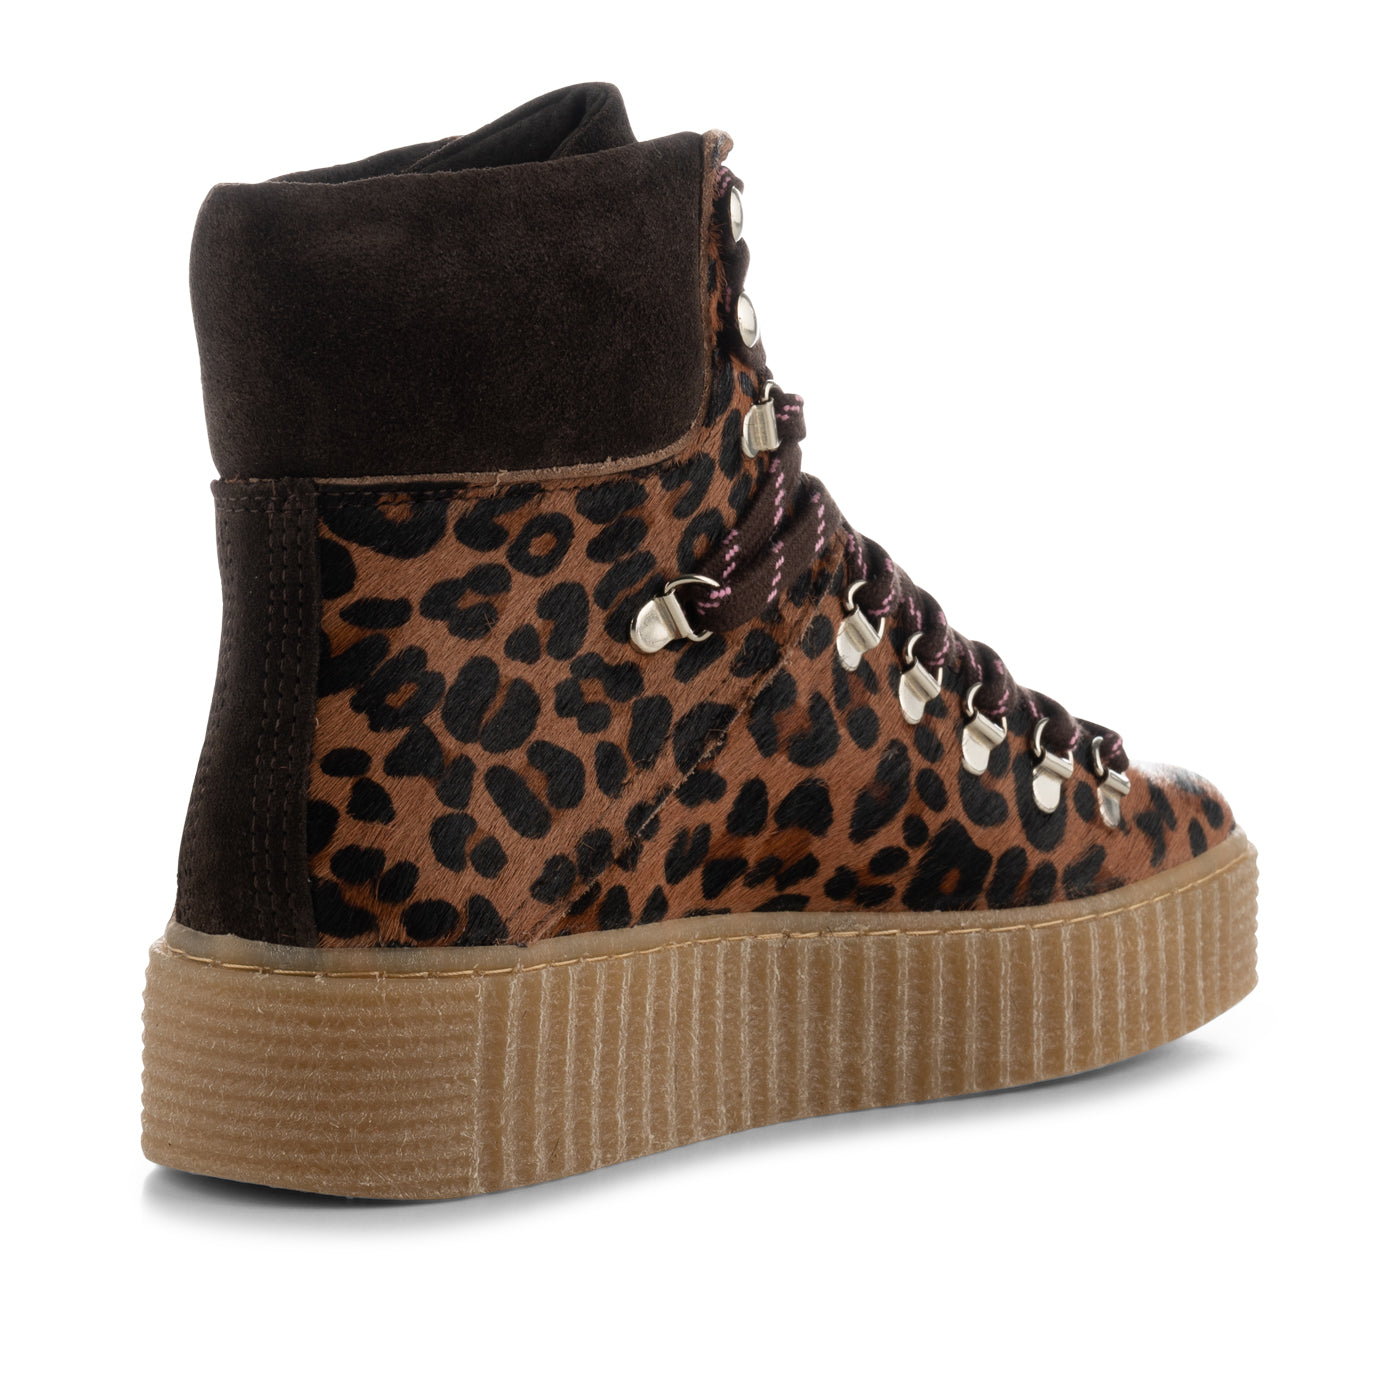 SHOE THE BEAR WOMENS Agda boot suede Boots 870 CHESTNUT LEOPARD PONY